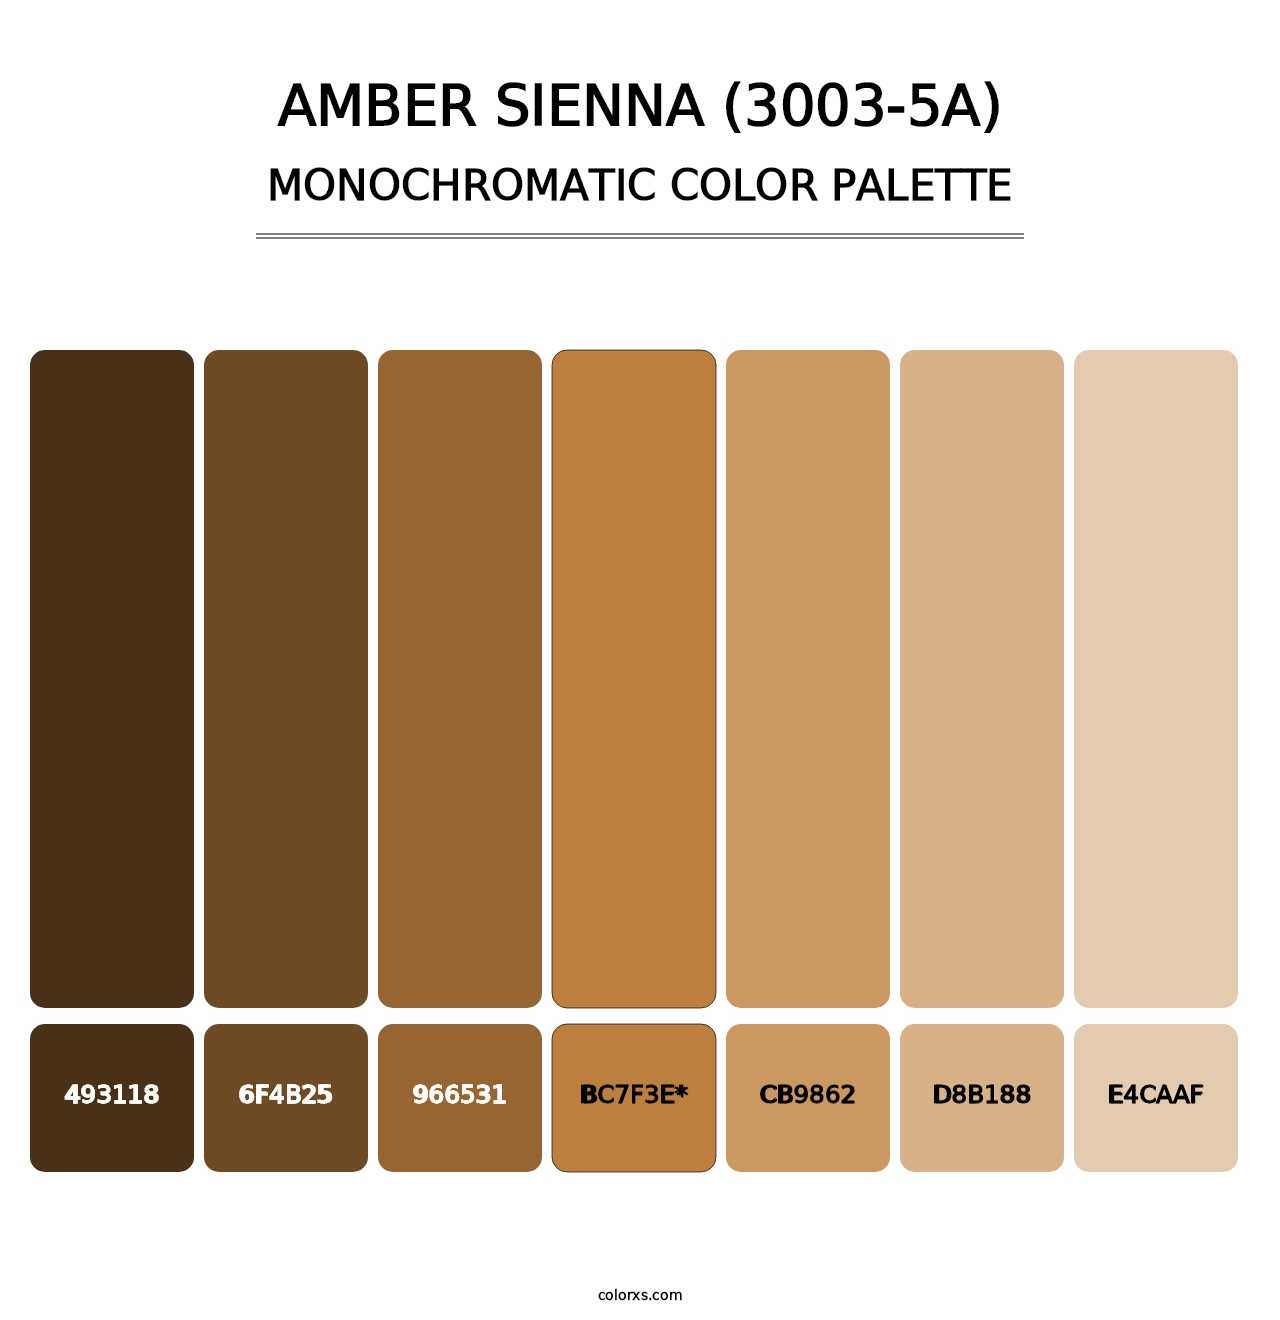 Amber Sienna (3003-5A) - Monochromatic Color Palette